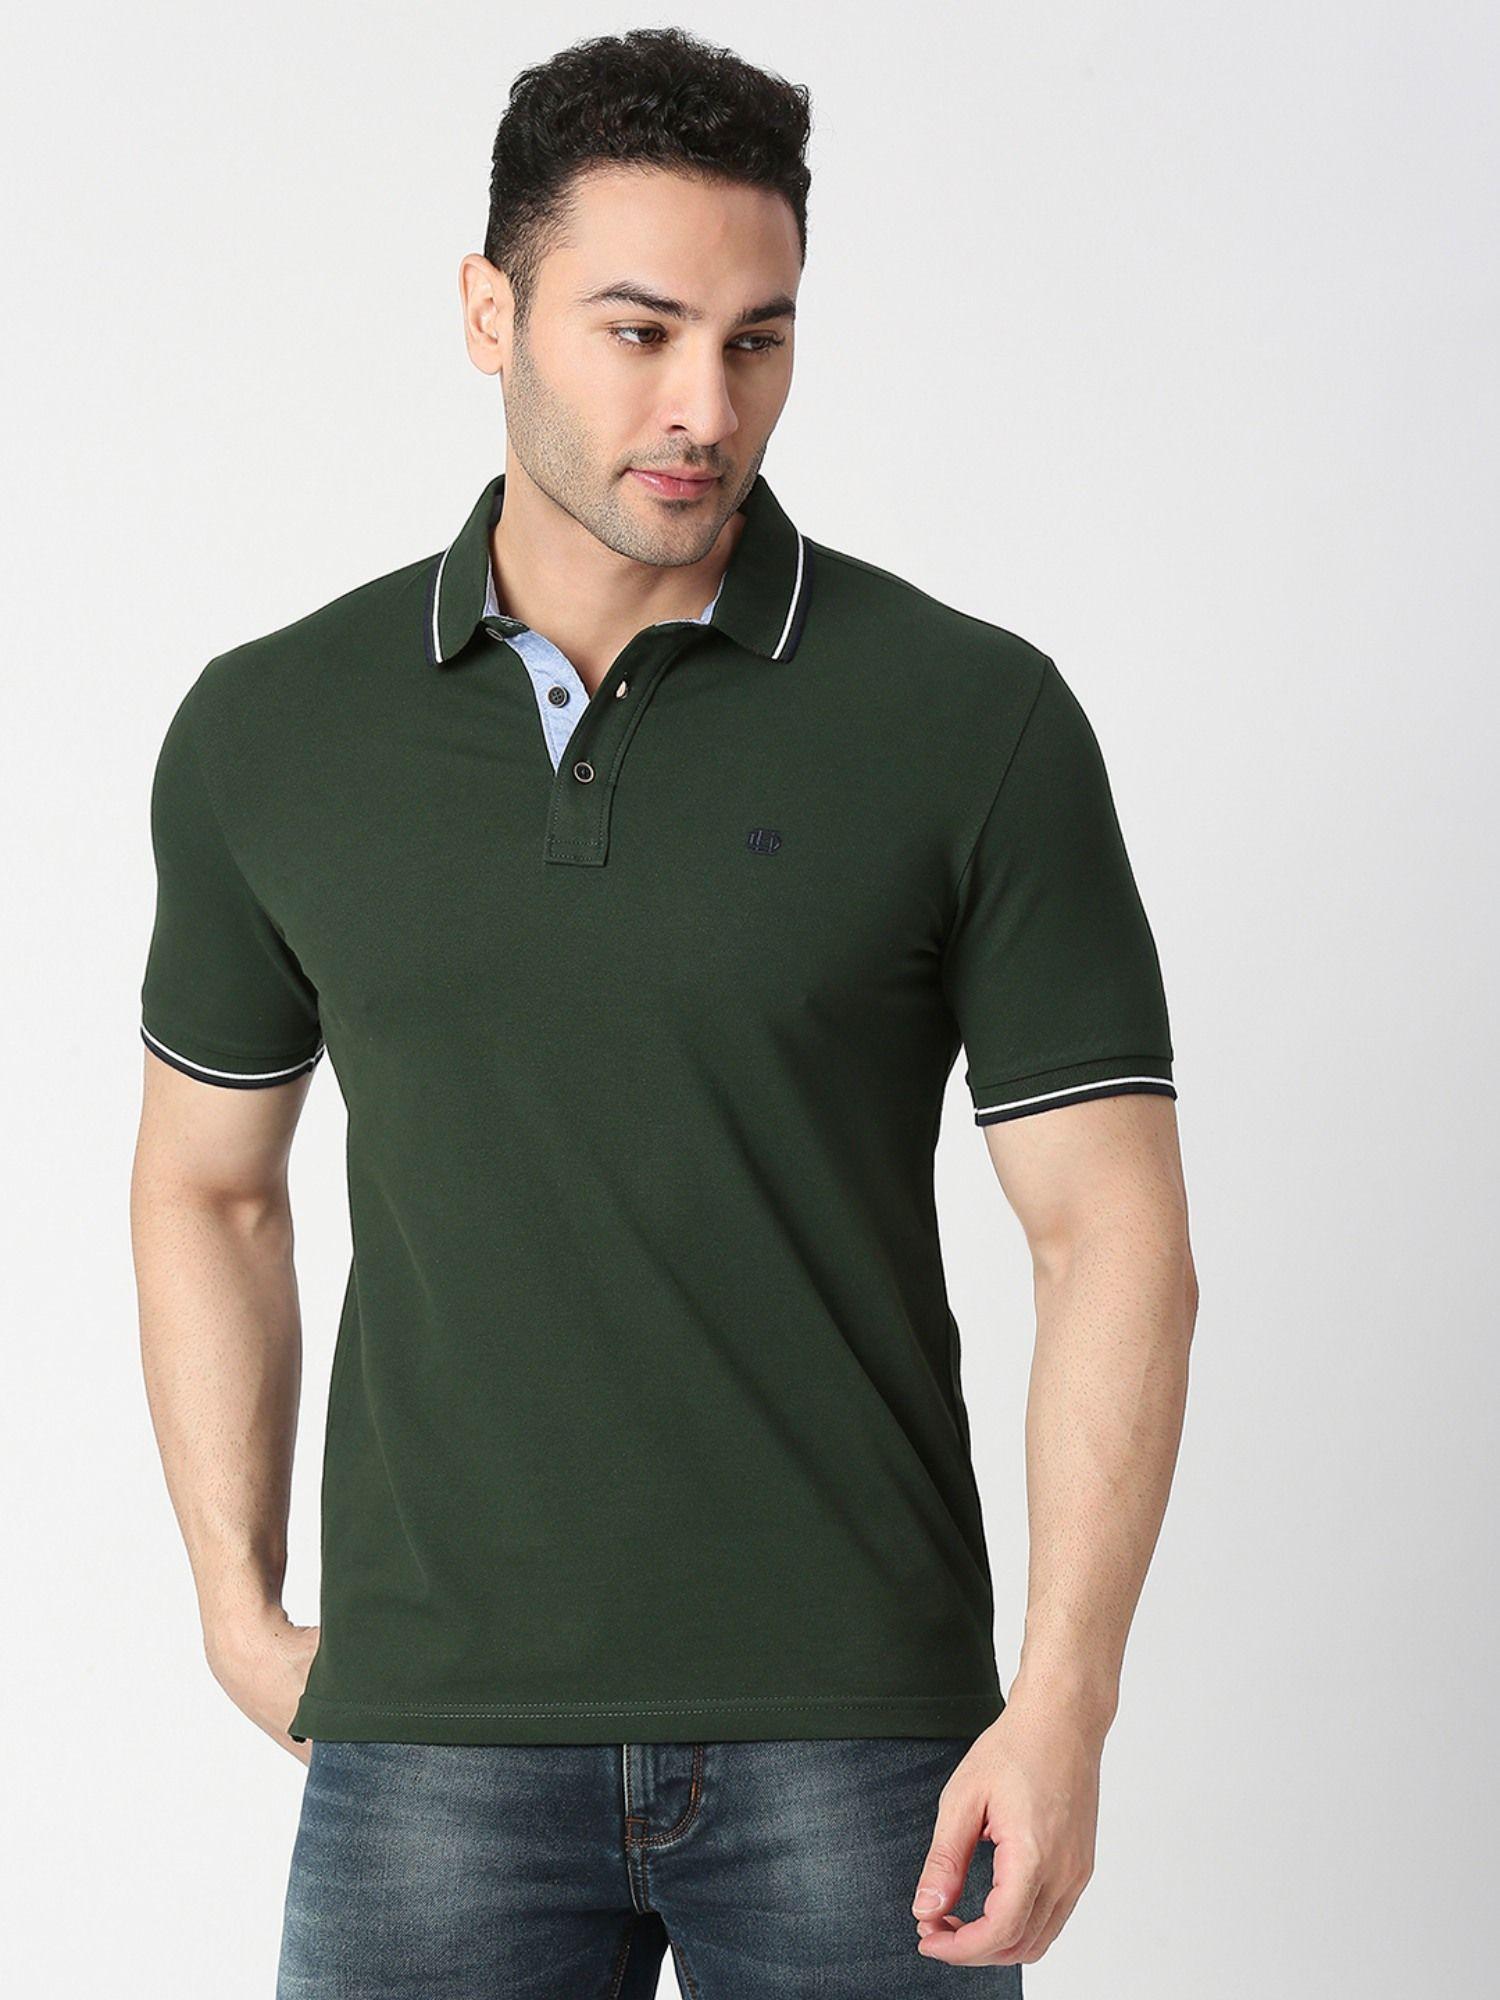 half sleeves bottle green pique lycra polo t-shirt with tipping collar